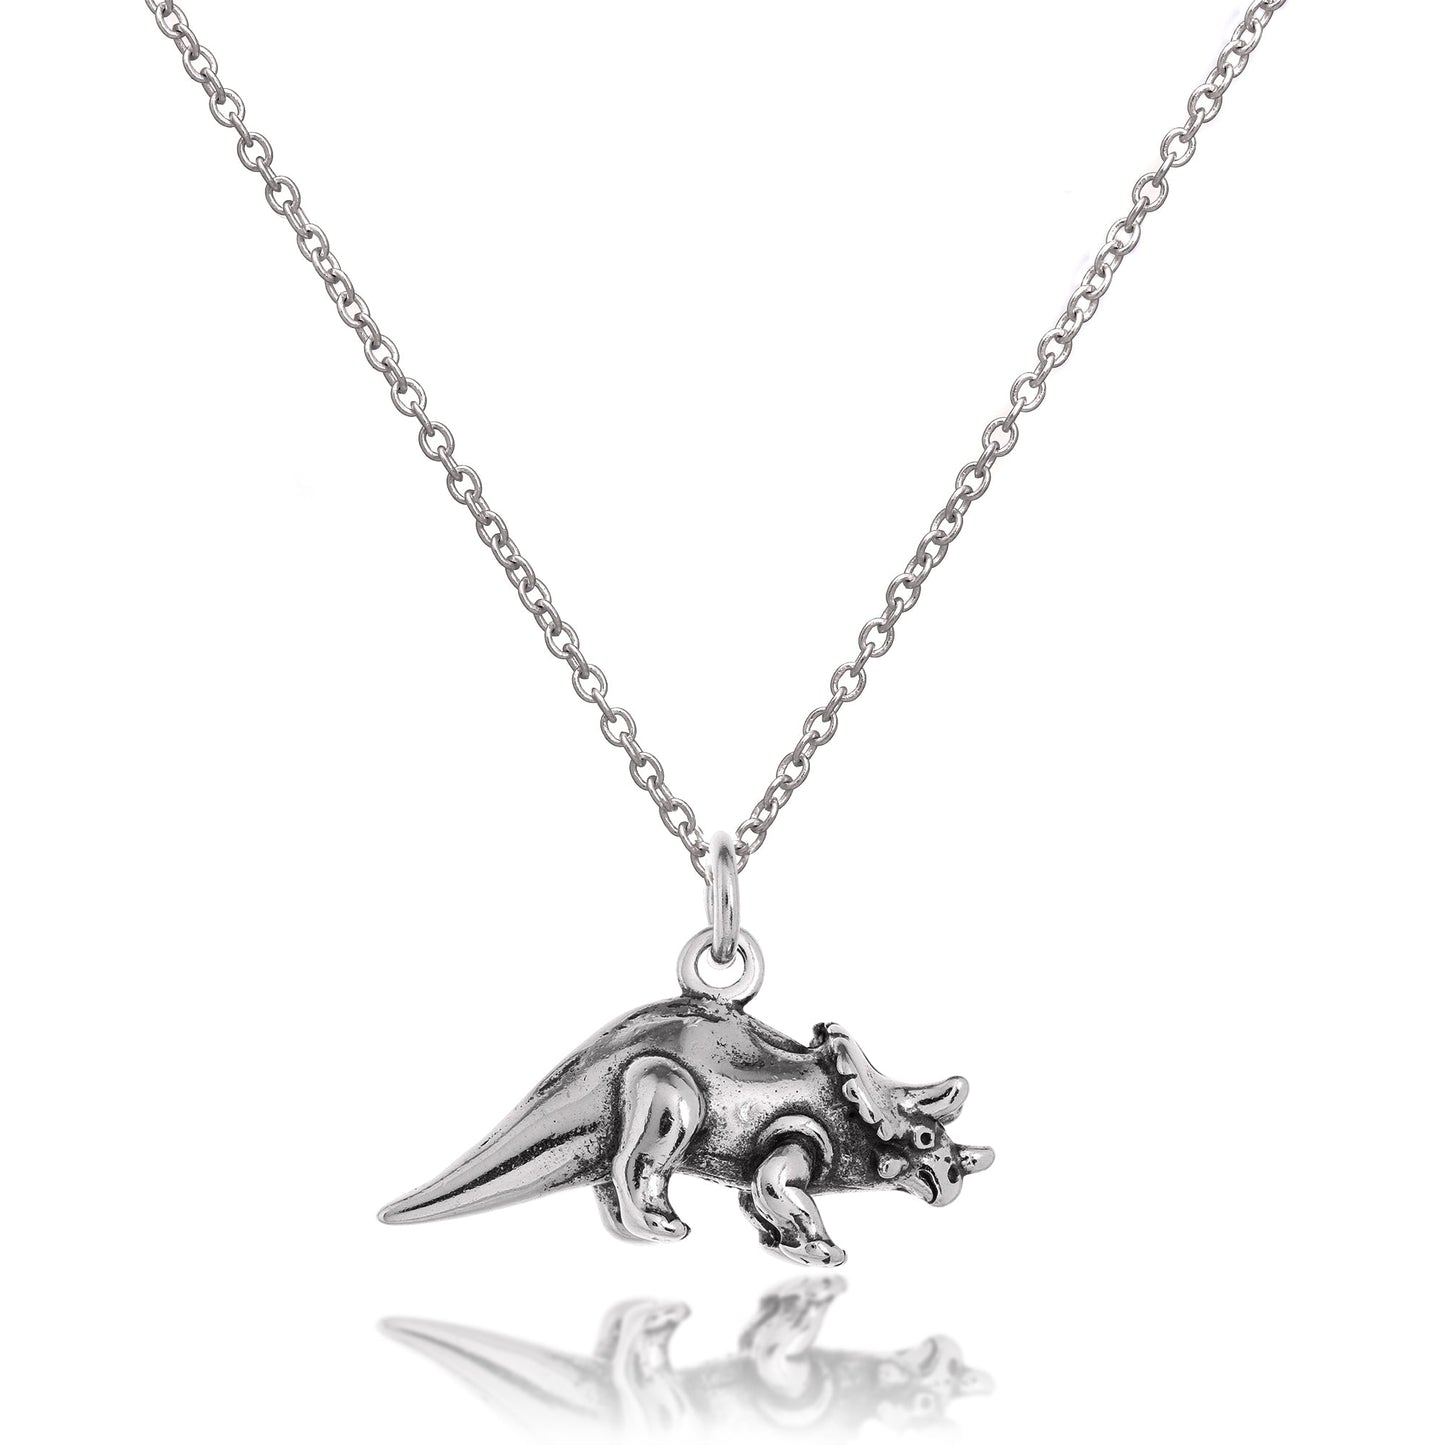 Sterling Silver 3D Triceratops Dinosaur Necklace